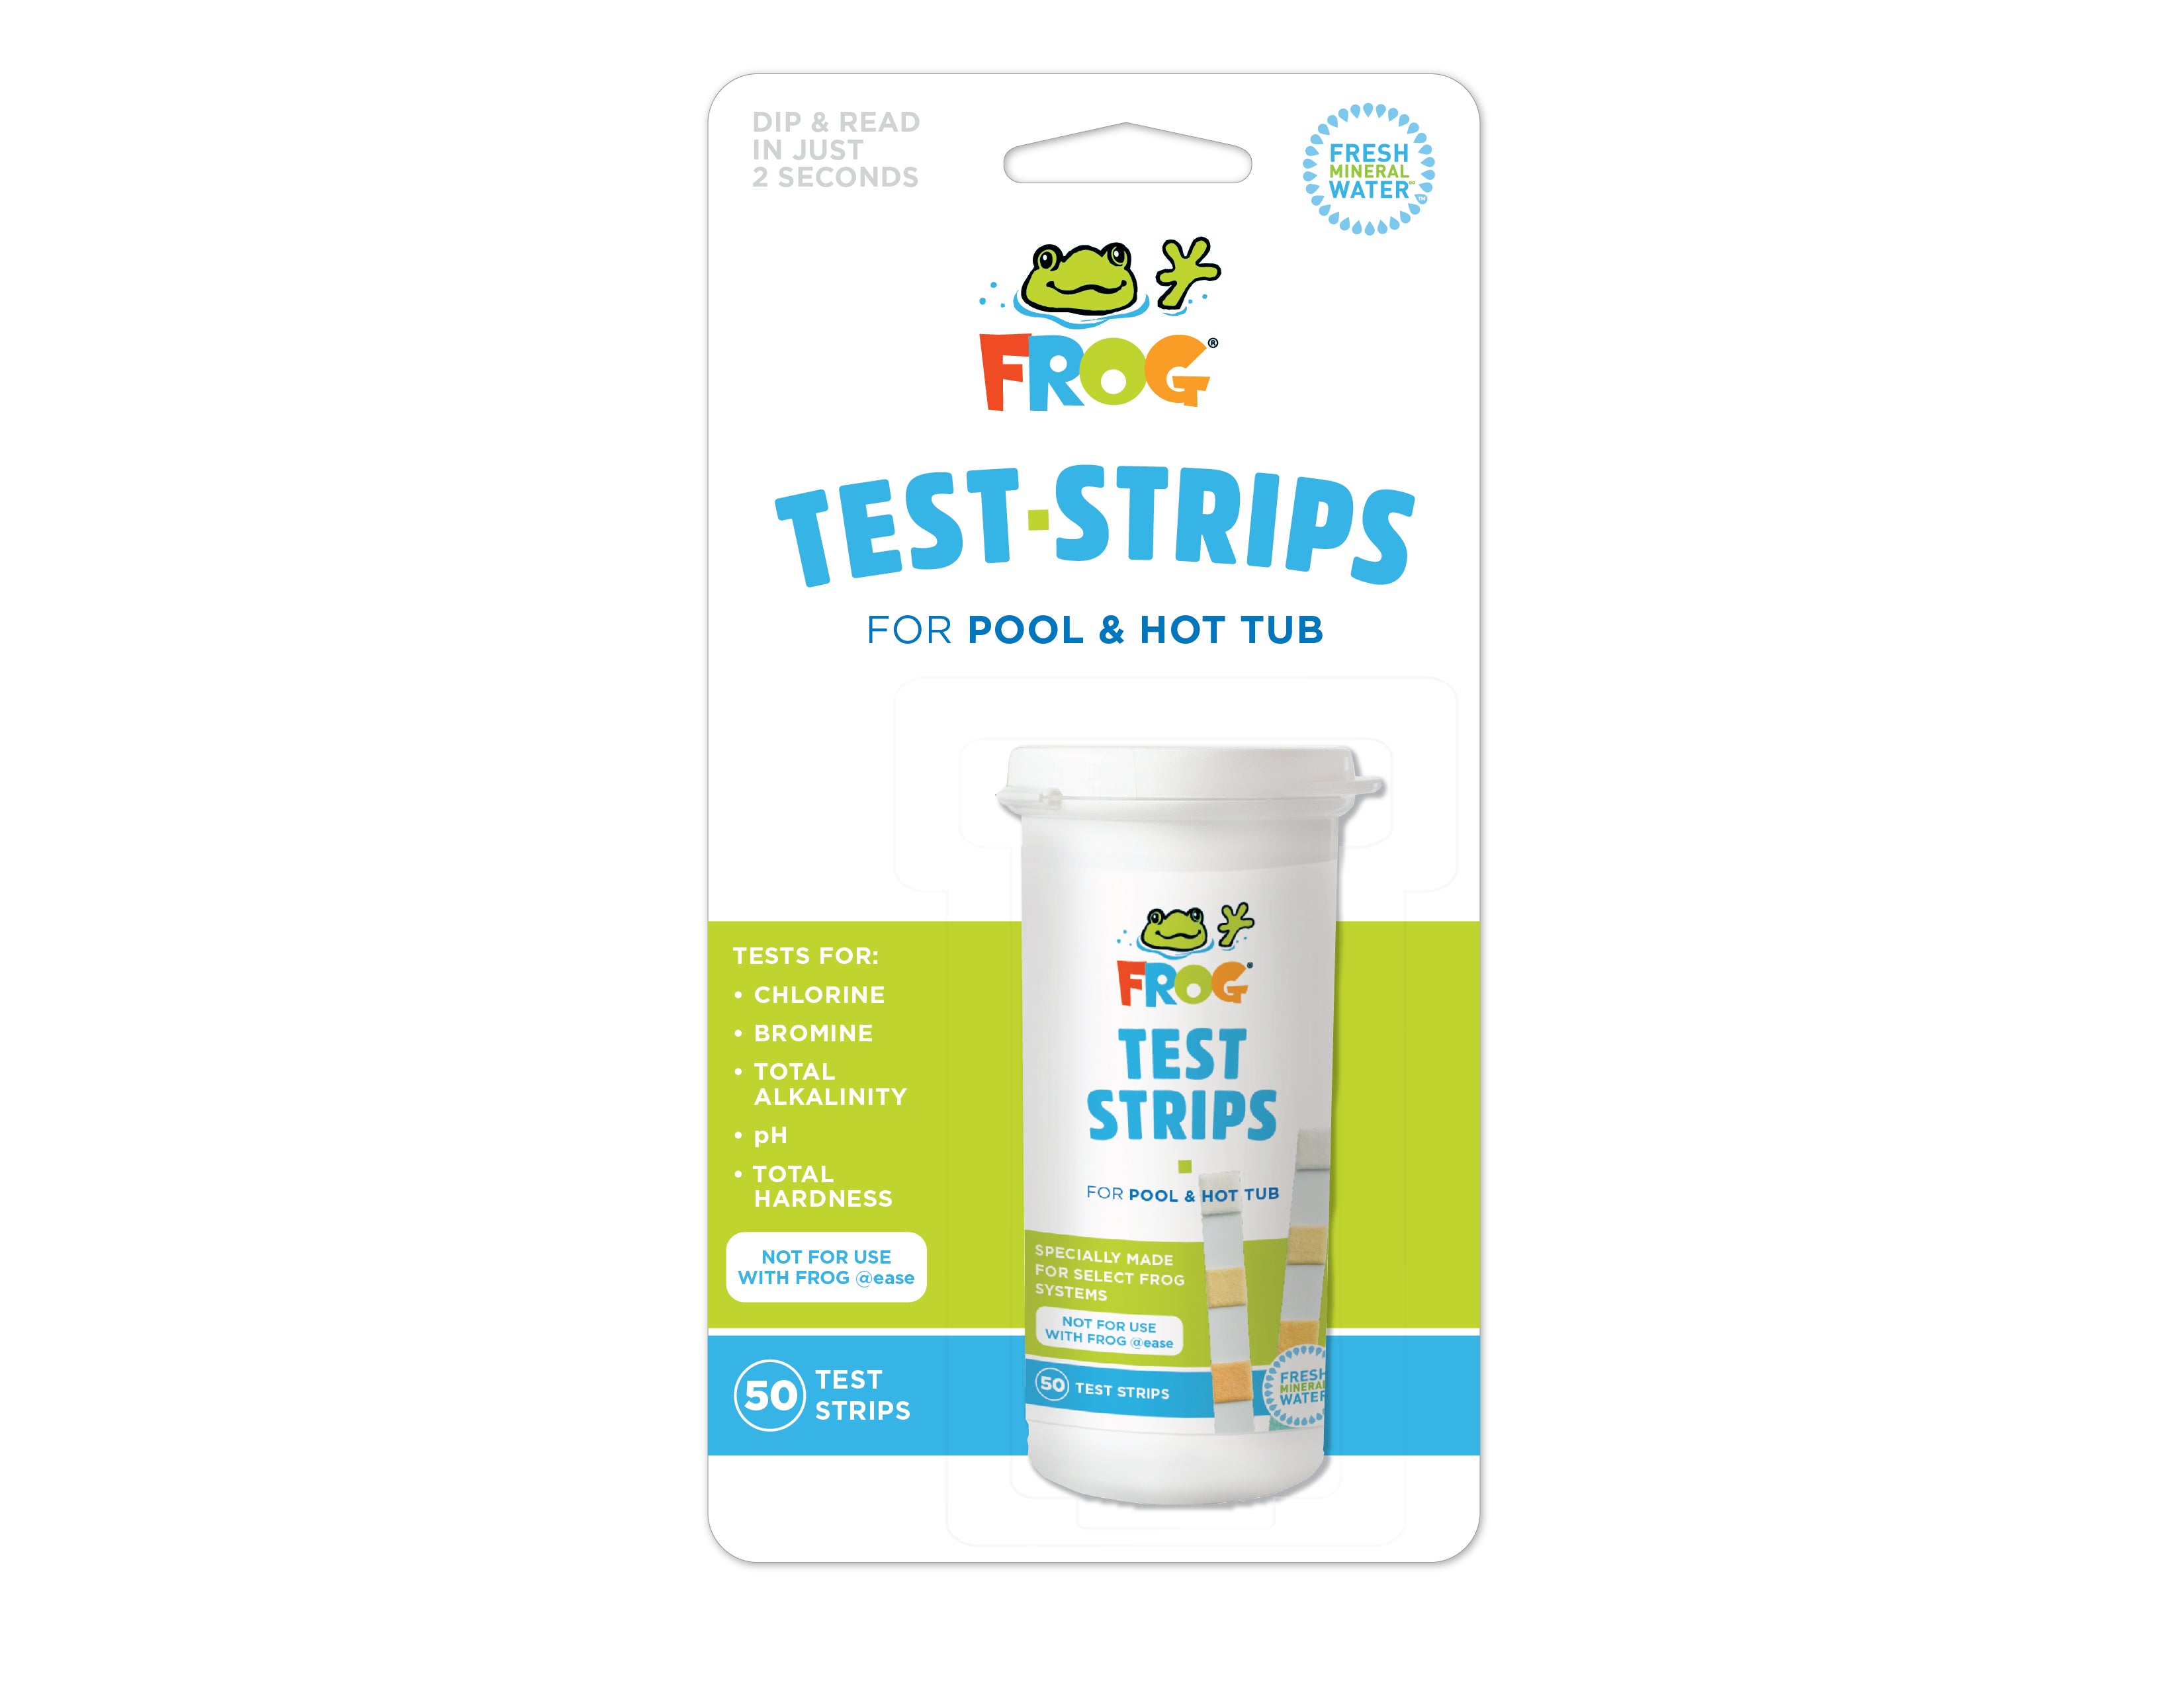 FROG Test Strips for Pools & Hot Tubs